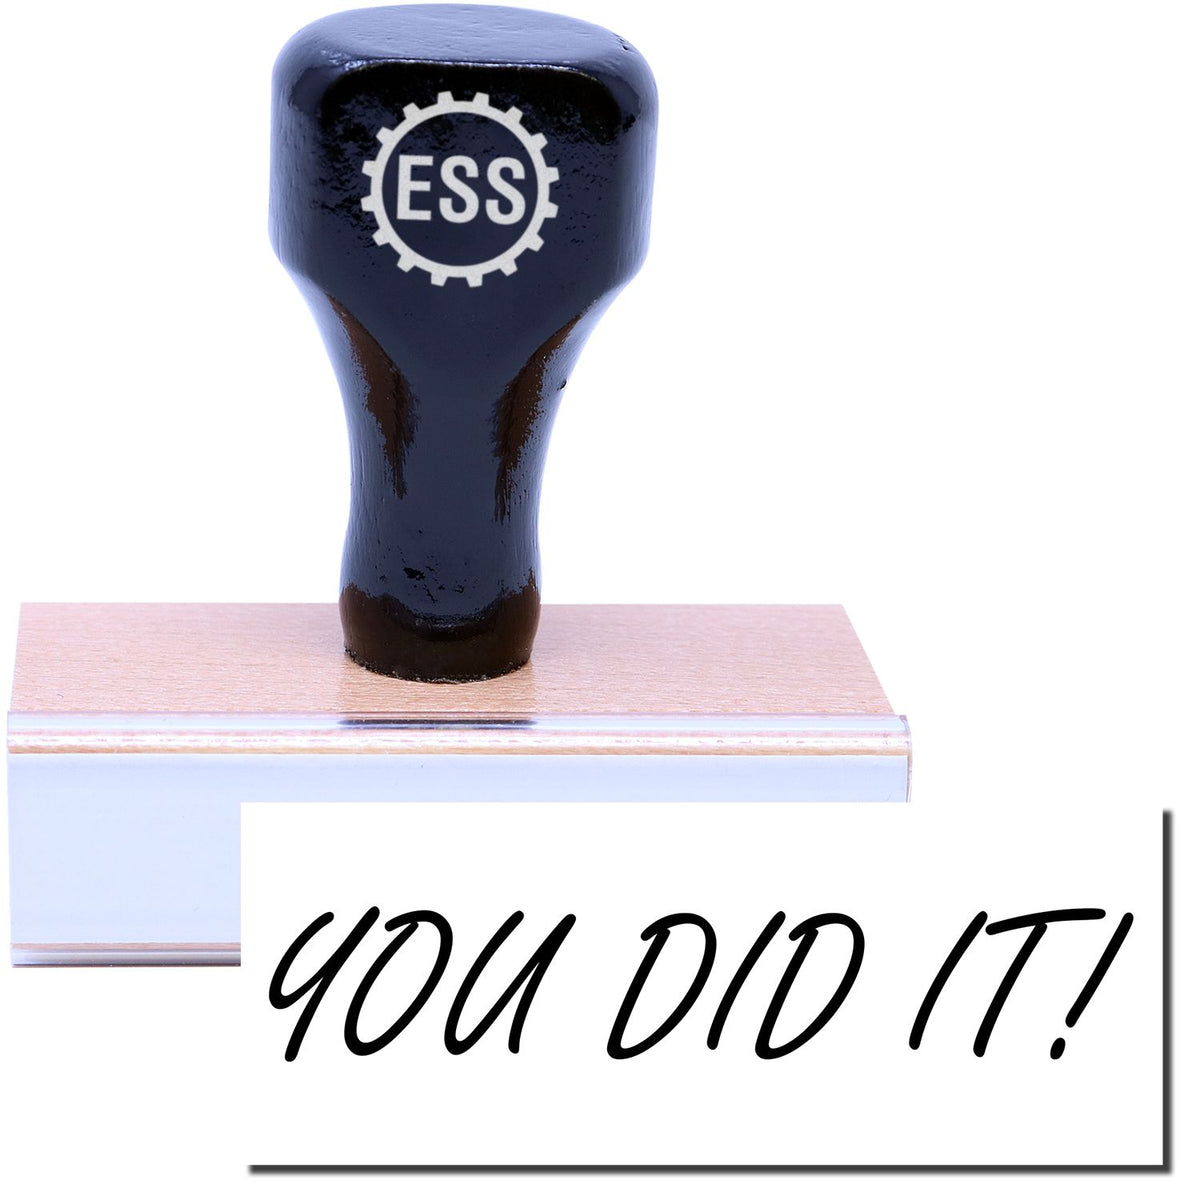 A stock office rubber stamp with a stamped image showing how the text &quot;YOU DID IT!&quot; in a large font is displayed after stamping.